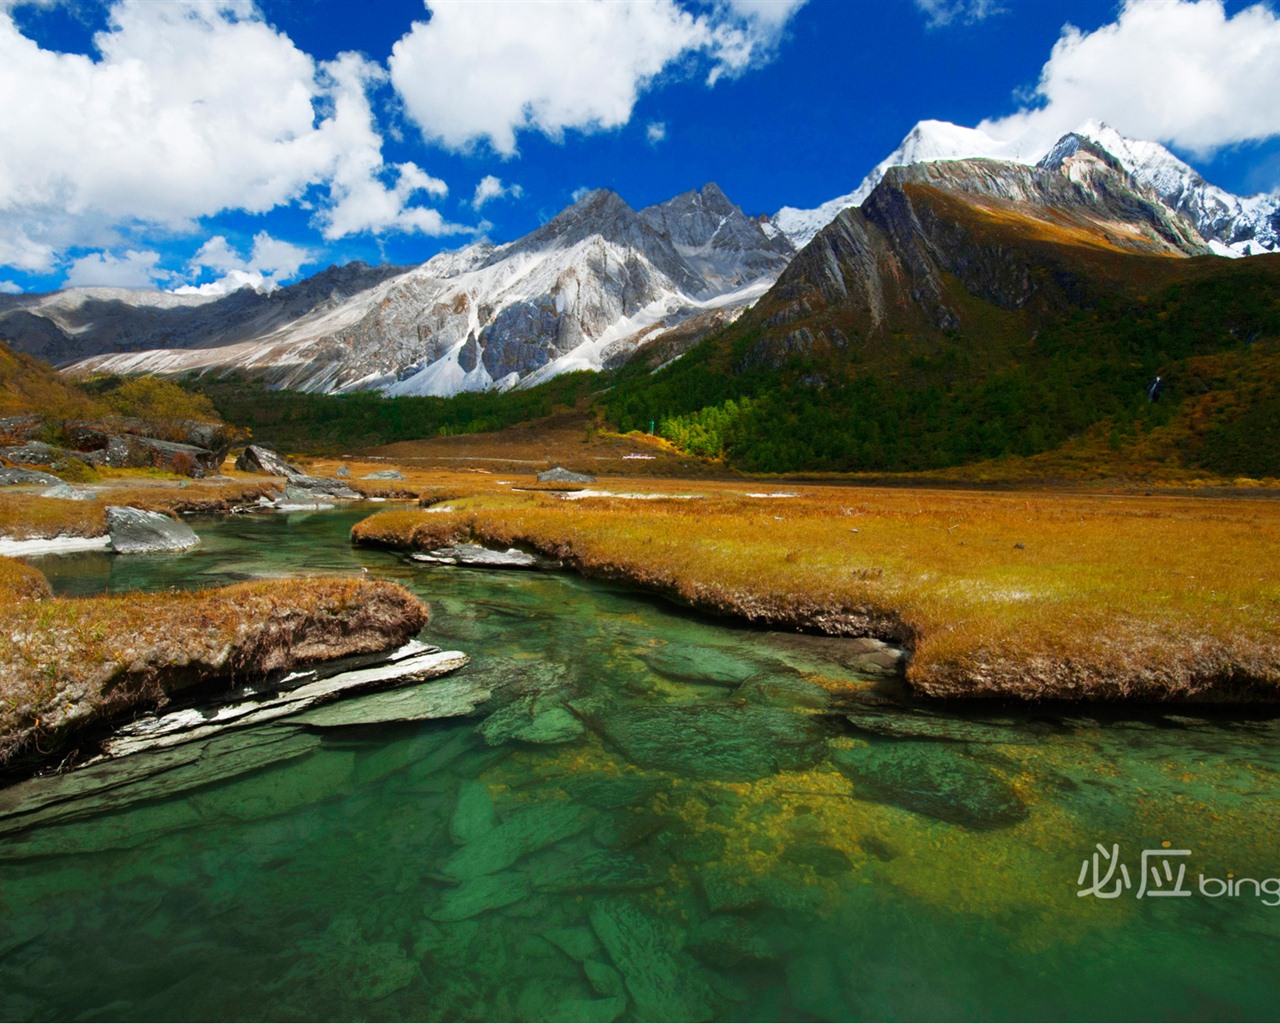 Best of Bing Wallpapers: China #10 - 1280x1024